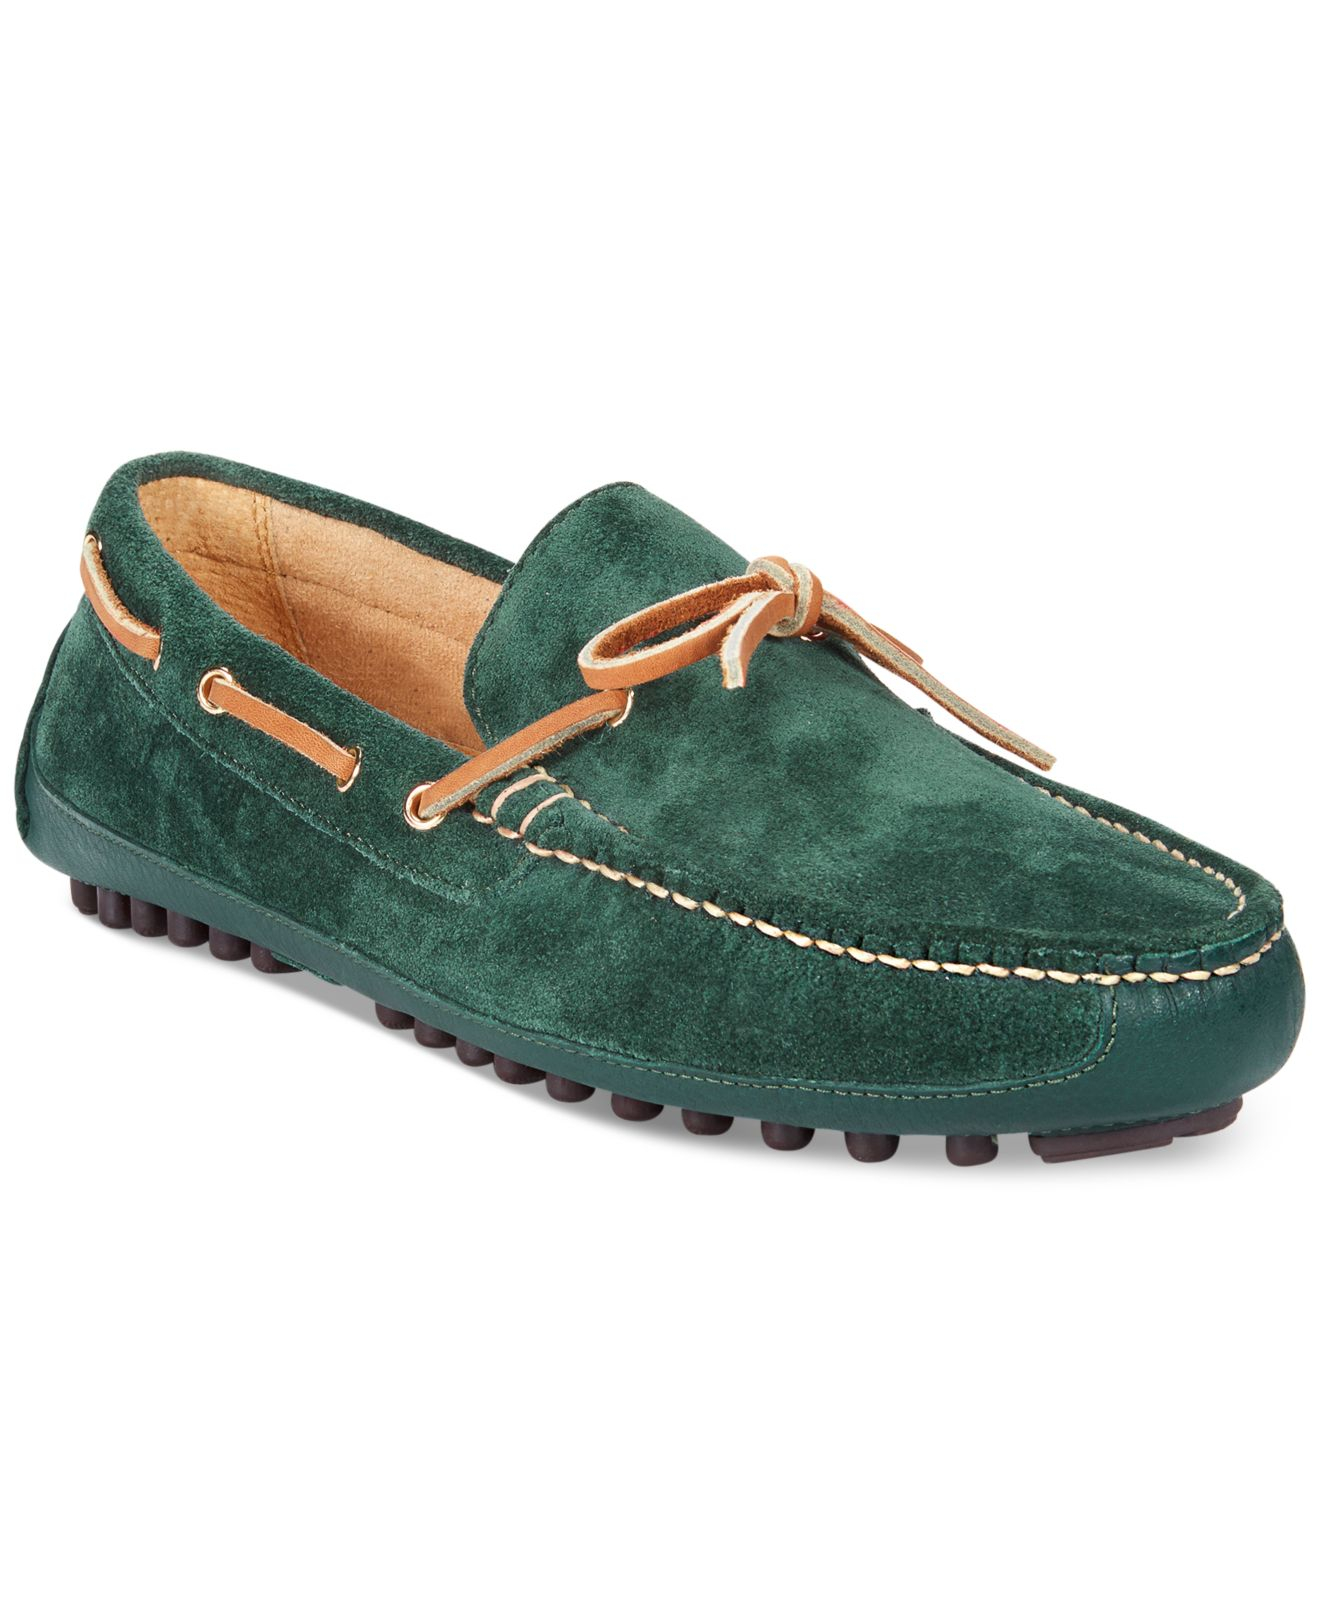 Lyst - Cole haan Grant Canoe Camp Moccasins in Black for Men